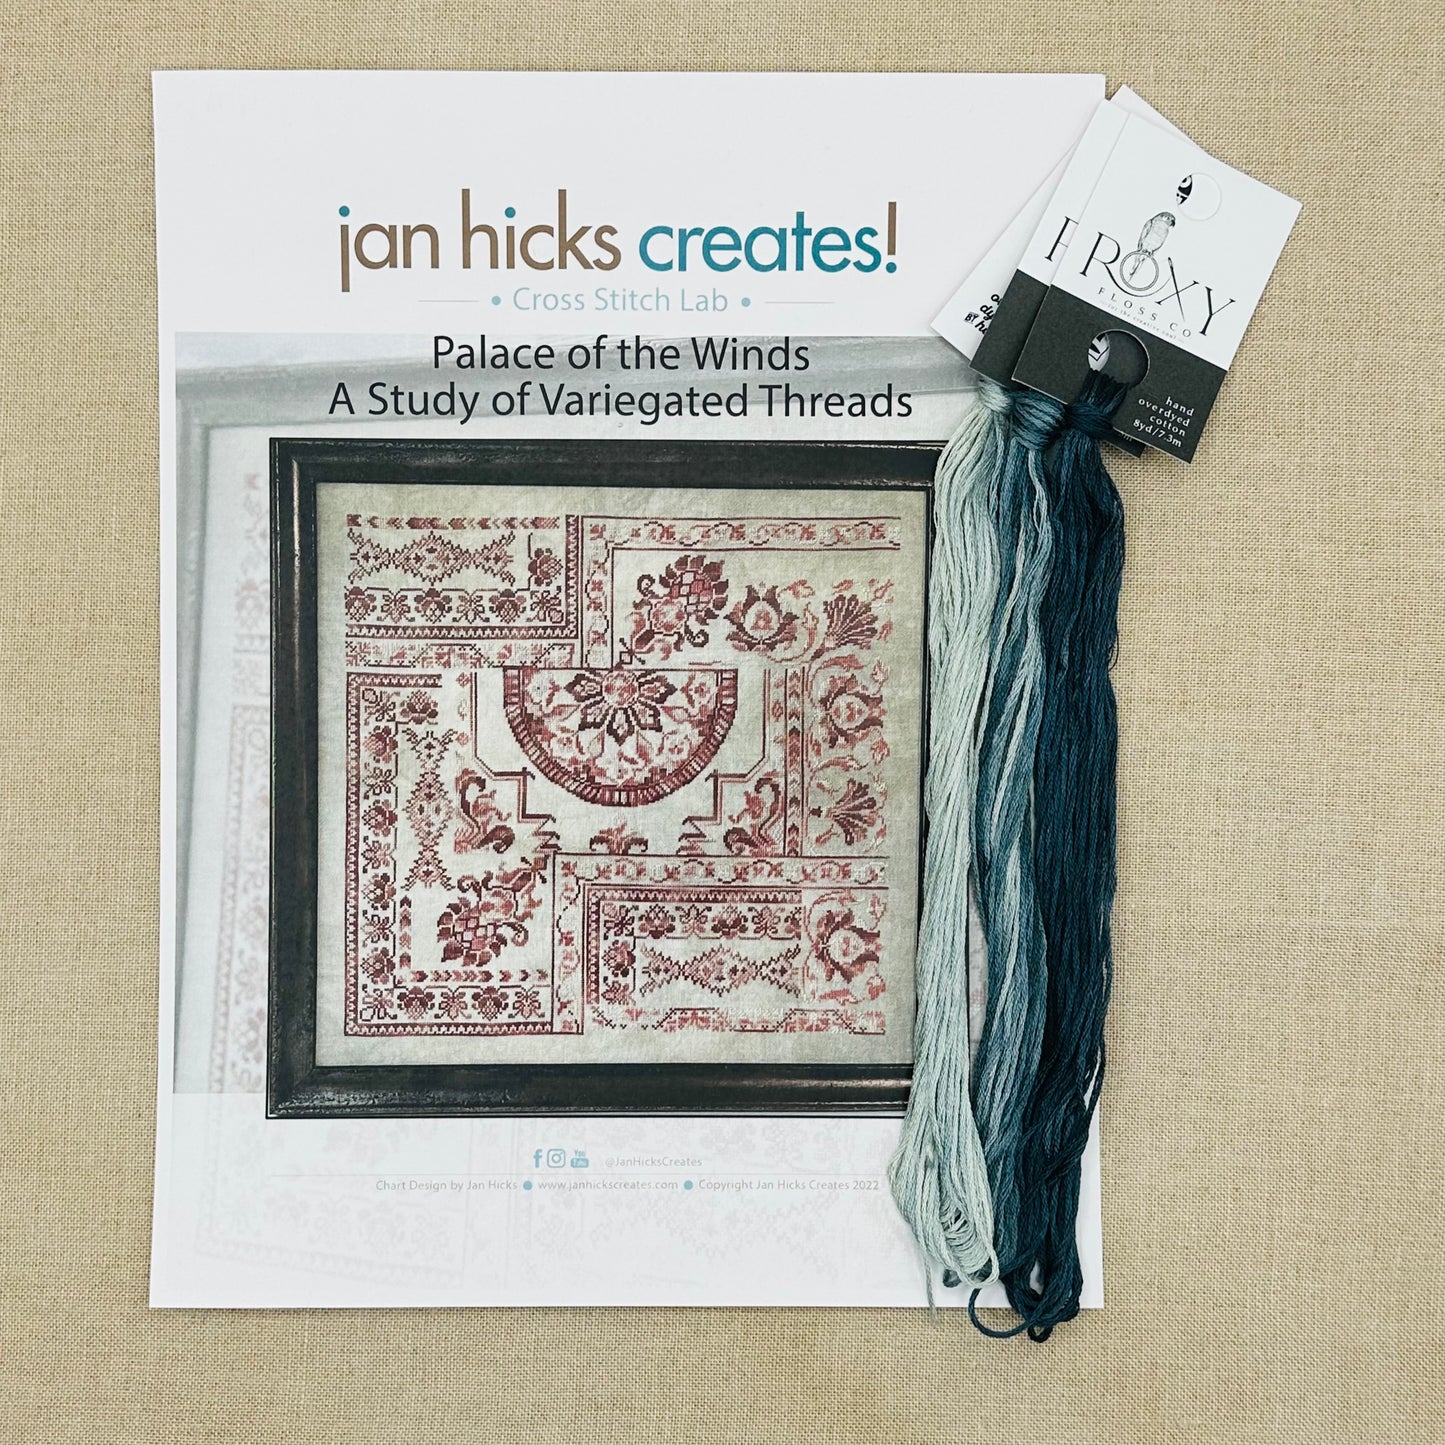 Jan Hicks Creates! - Palace of the Winds: A Study of Variegated Threads - Cross Stitch Chart and/or Roxy Floss Co Threads